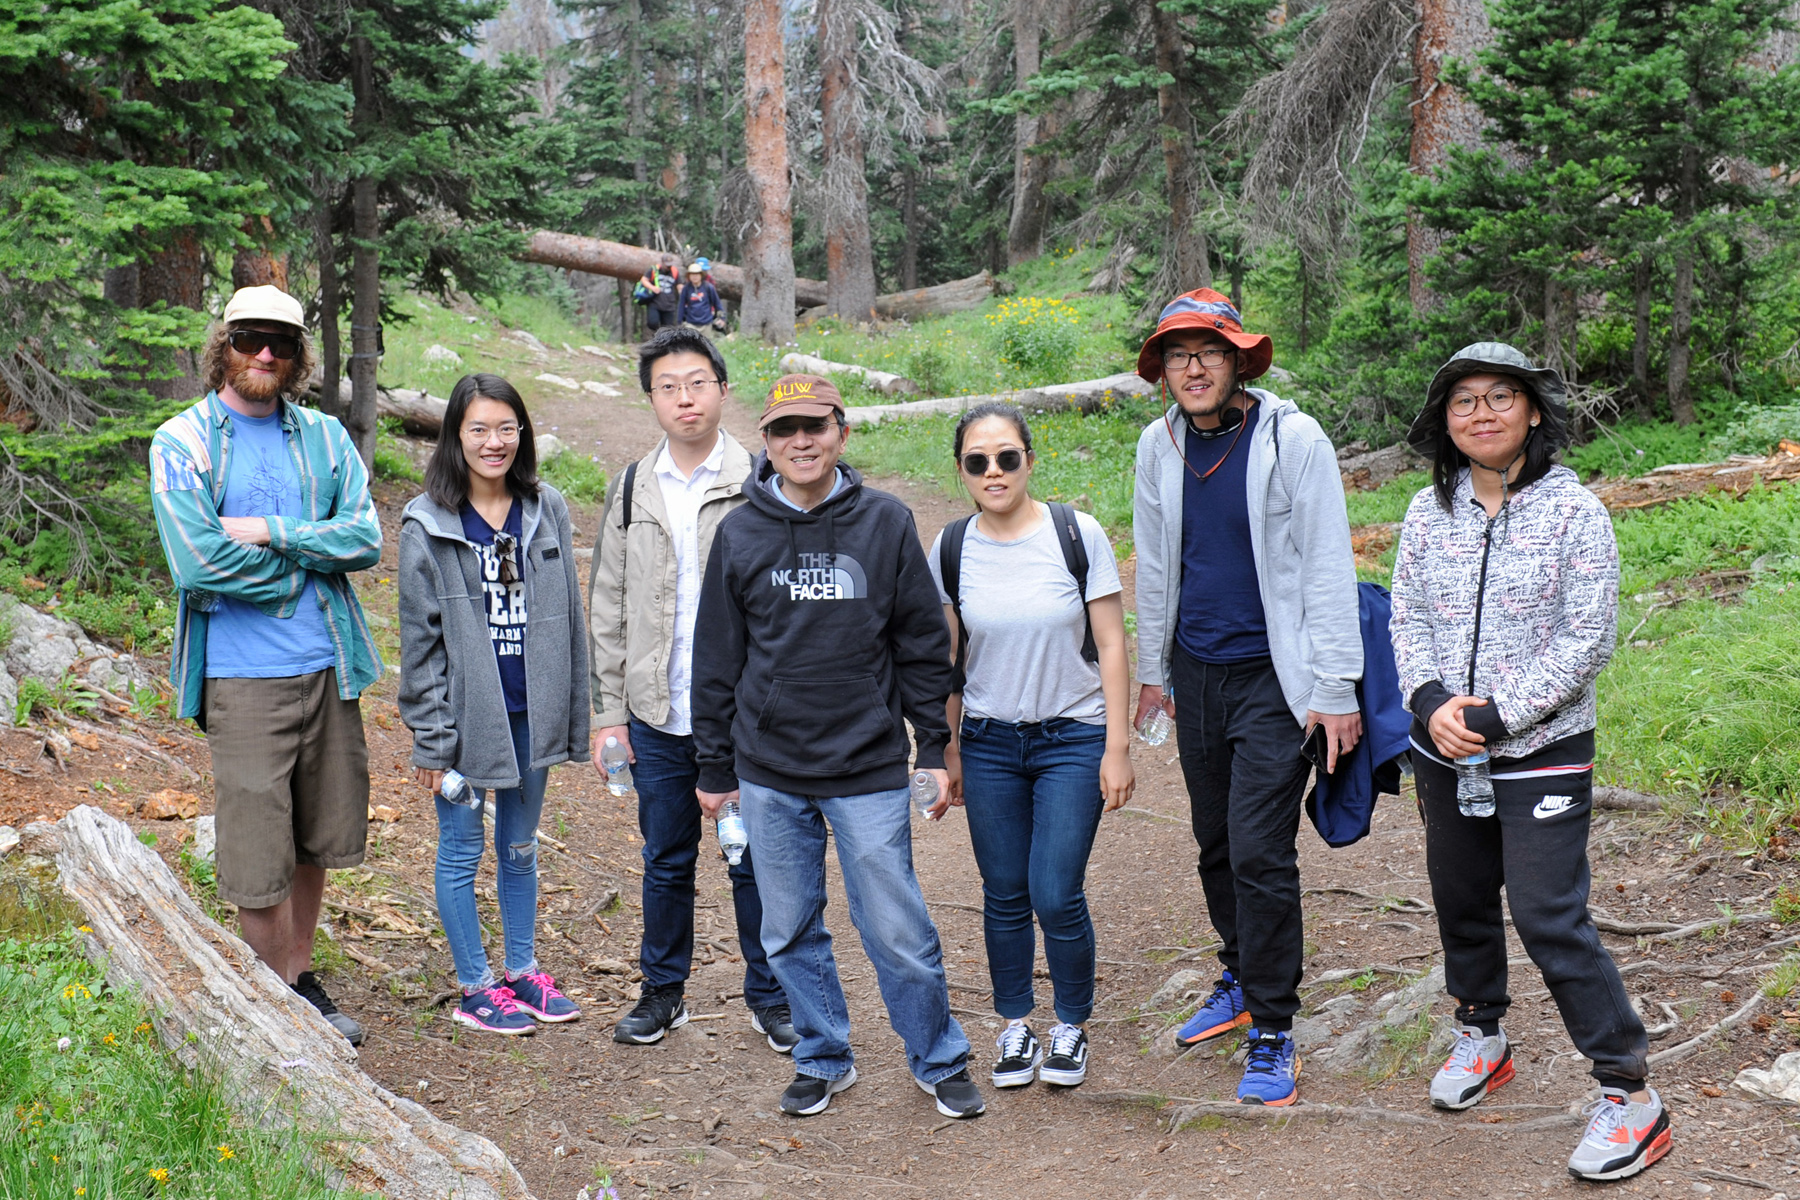 A group of seven people stop for a photo in the forest. Xiaohong Liu is in the middle of the group. Yunpeng Shan is one in from the right.